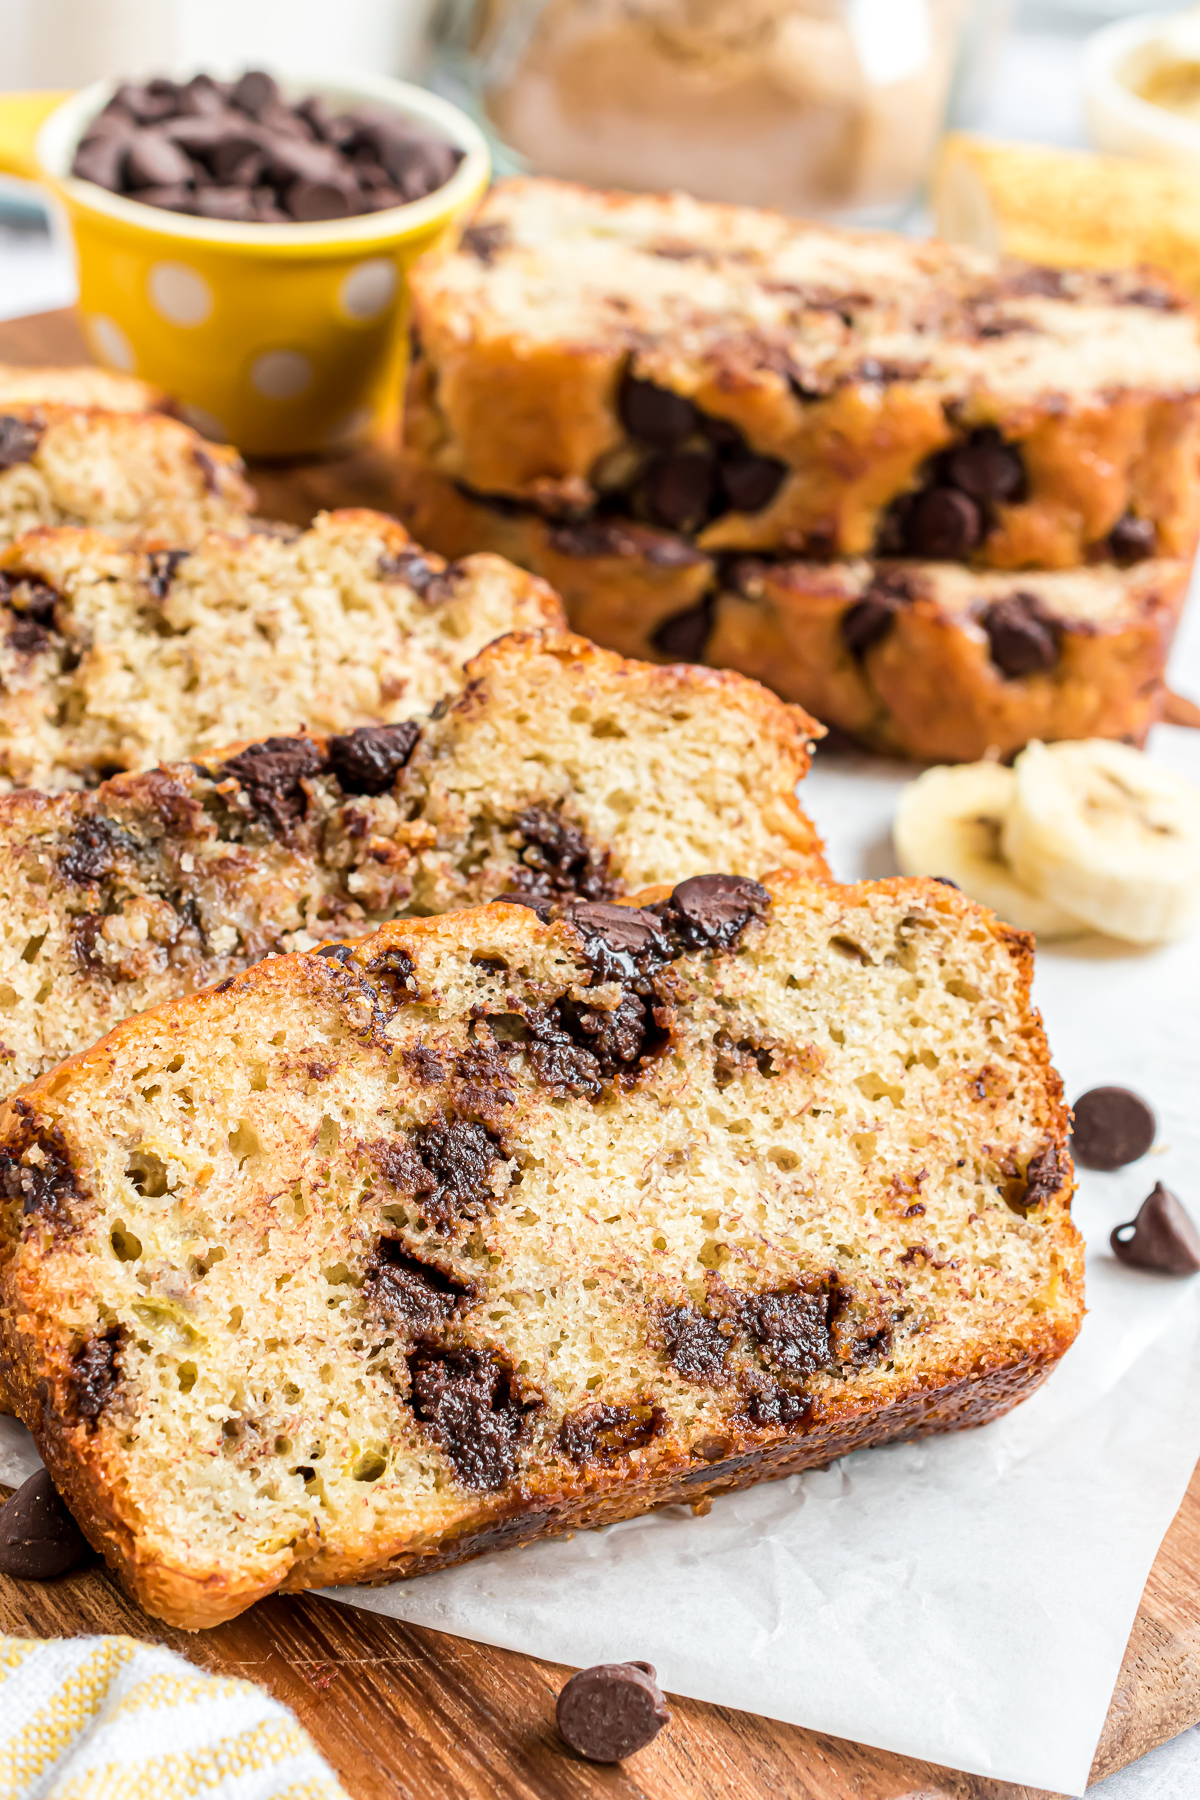 Two large slices of baked banana bread with pancake mix showing the moist texture of the bread and the distribution of chocolate chips.